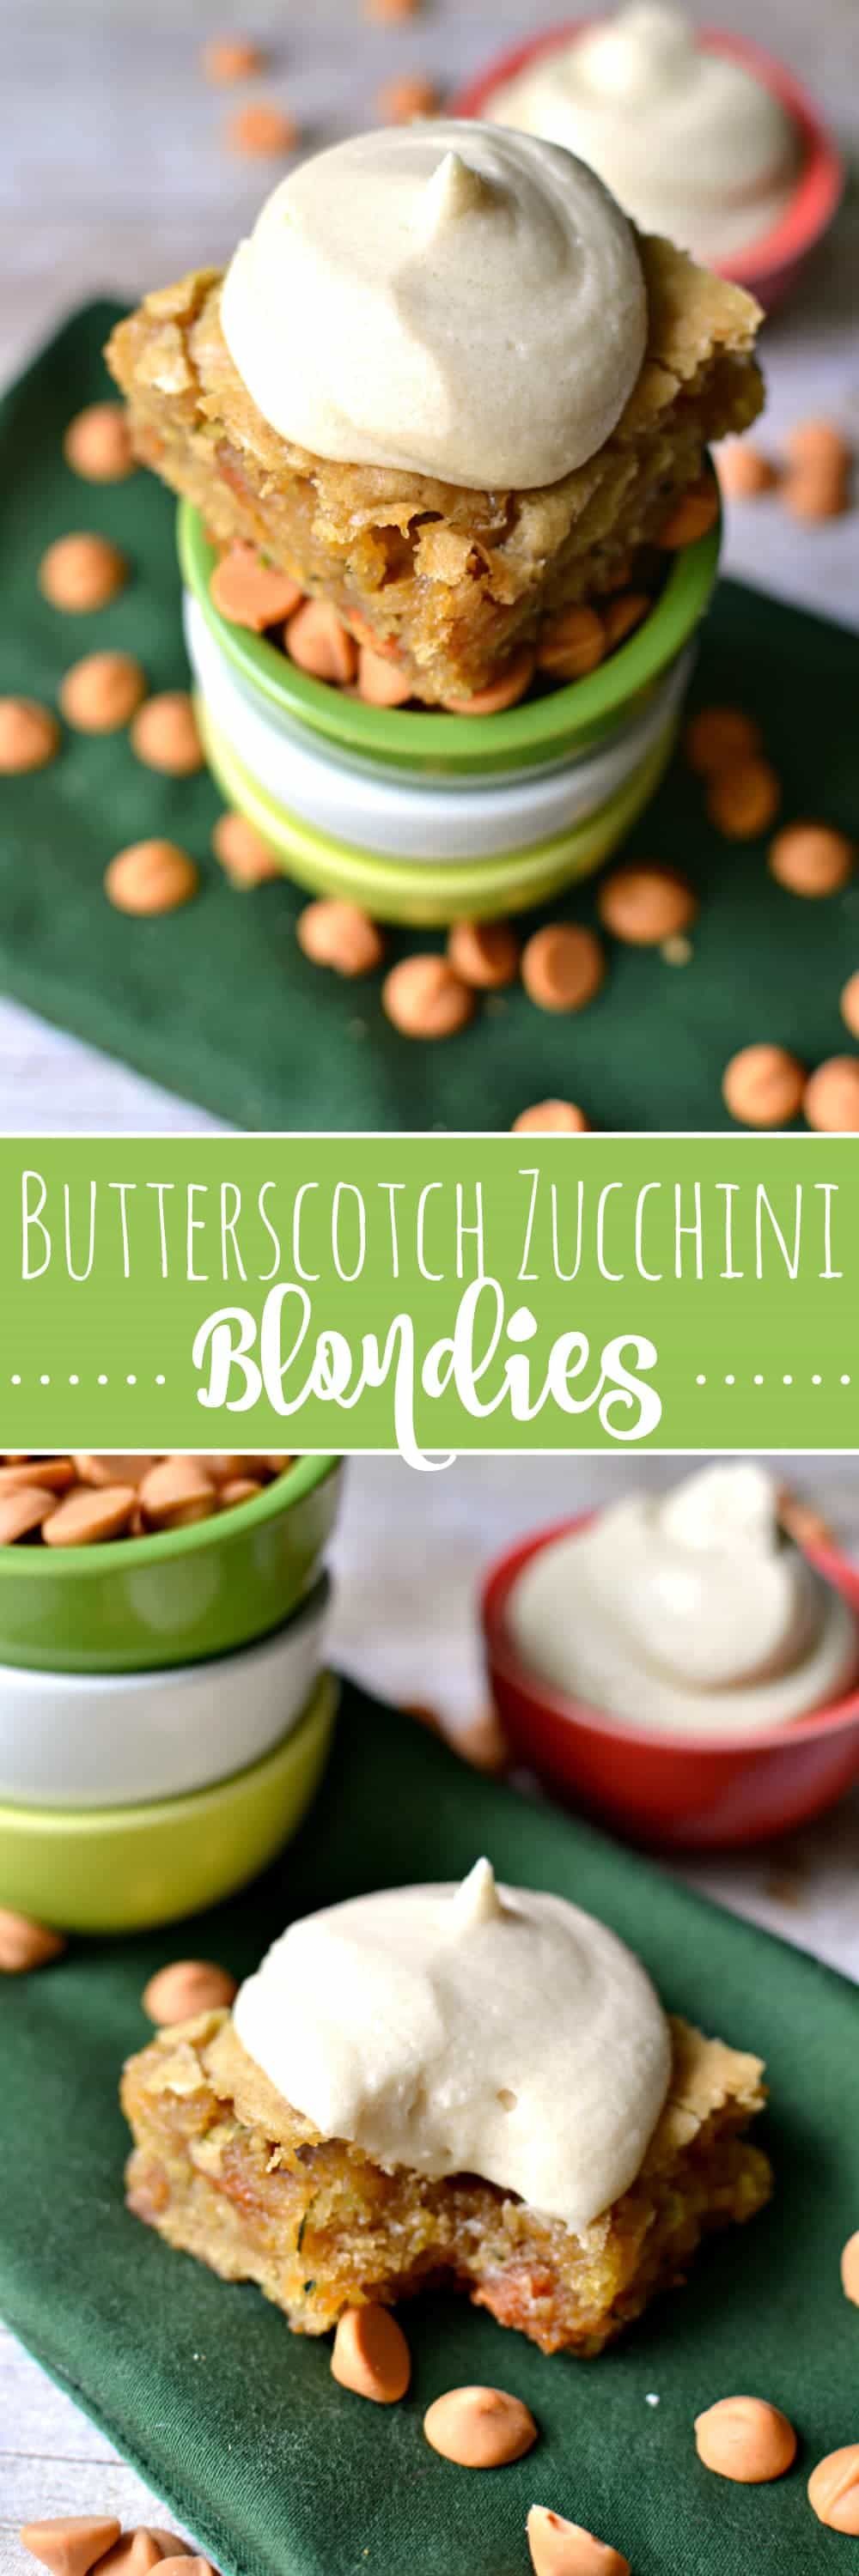 Butterscotch Zucchini Blondies with Brown Sugar Buttercream Frosting. OMG delicious!